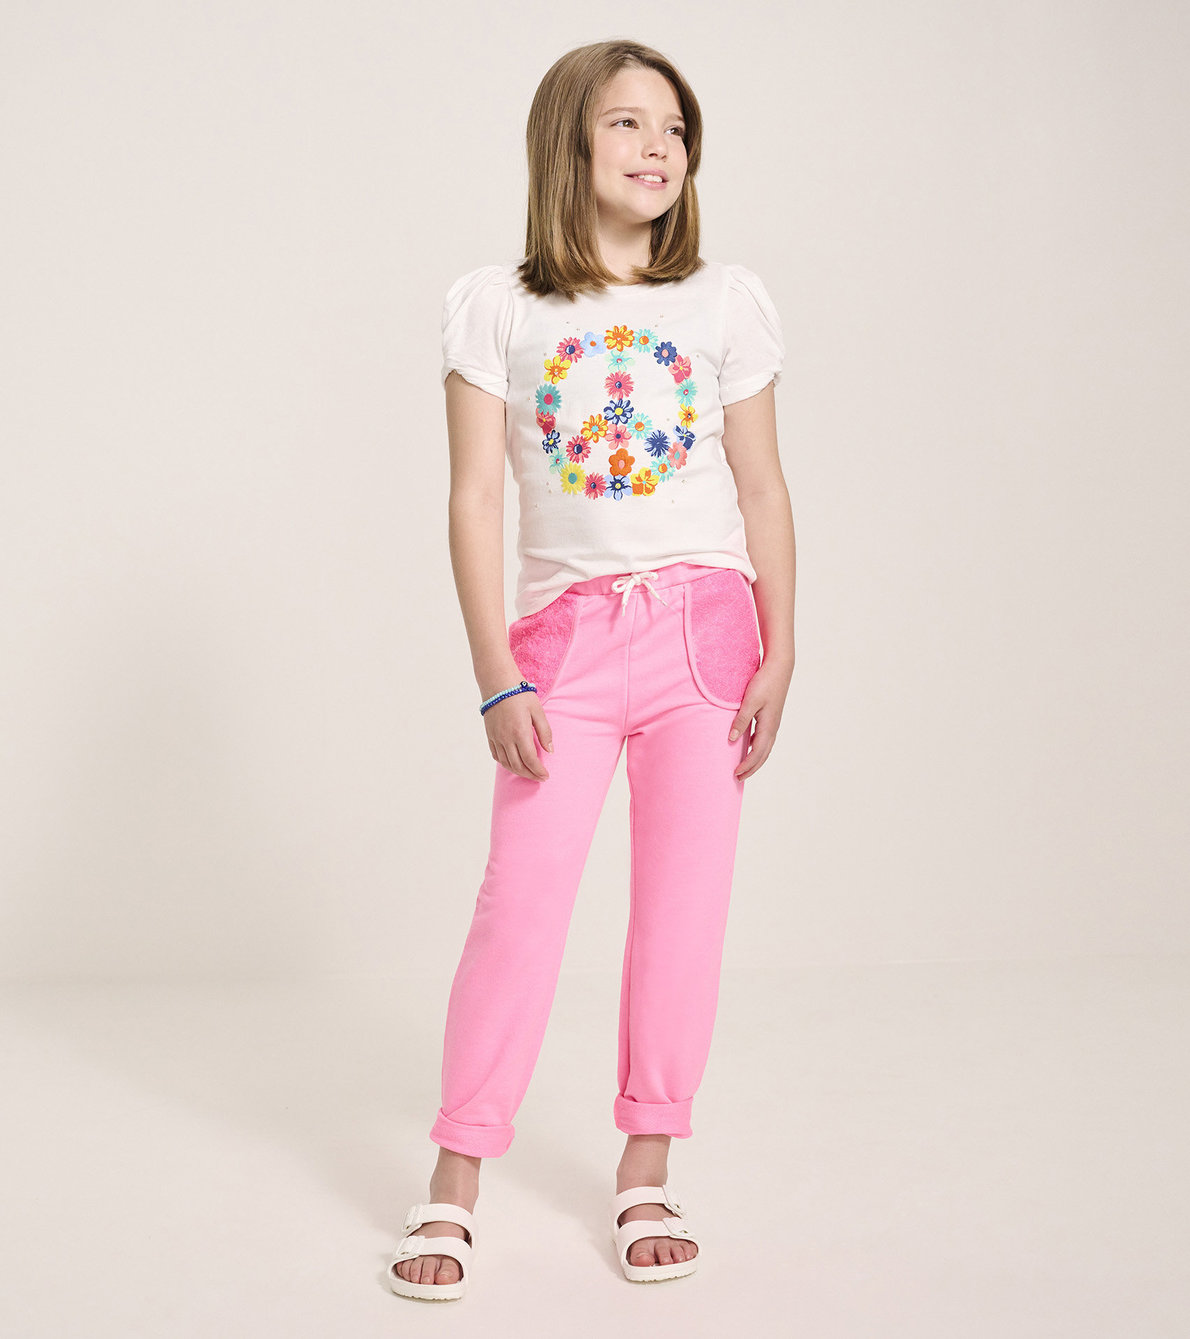 View larger image of Girls Peace Flower Twisted Sleeve Tee